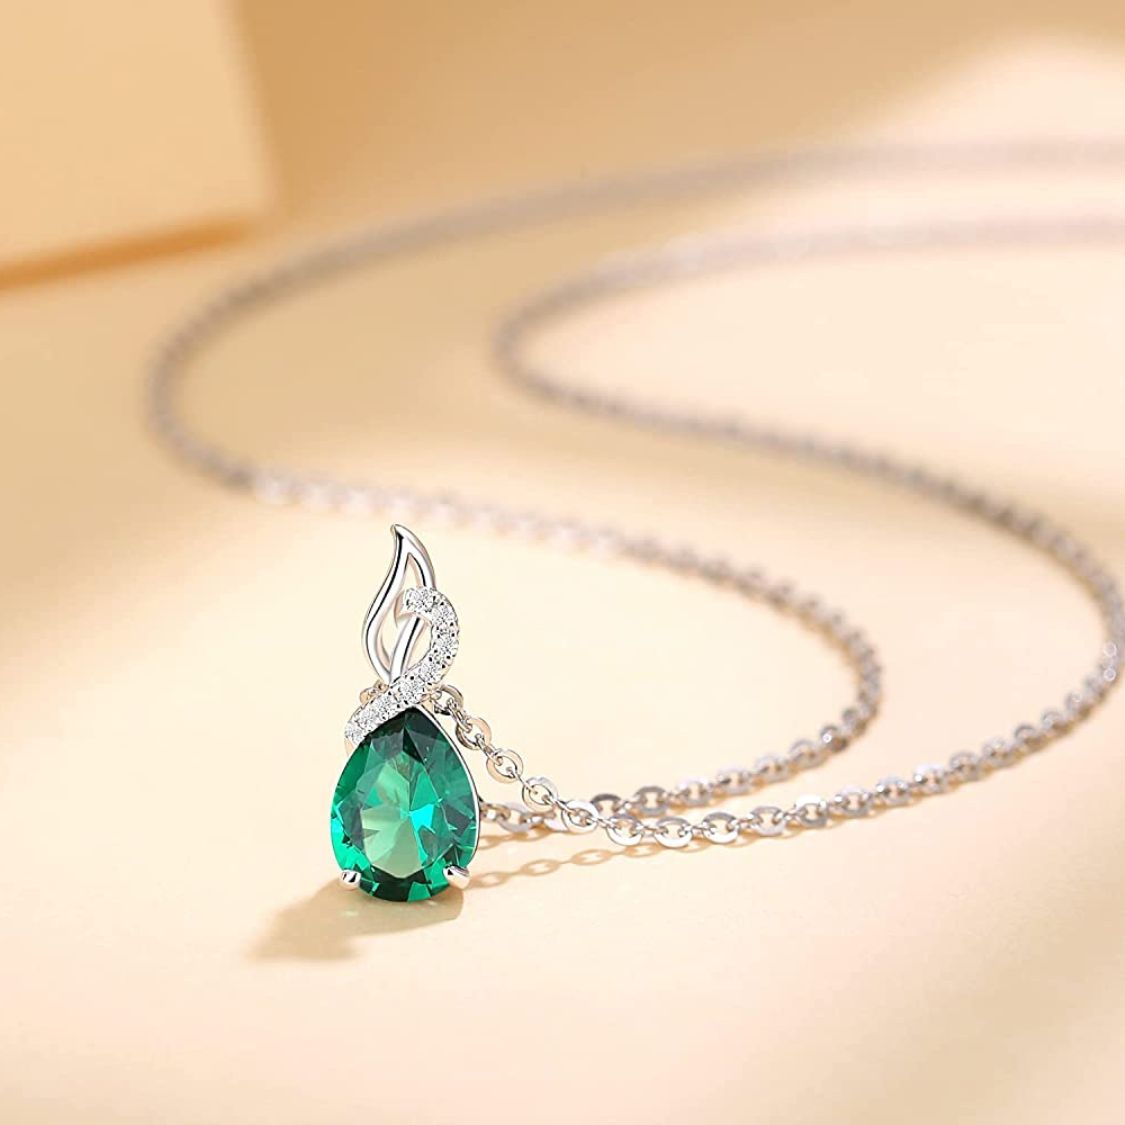 FANCIME "Timeless Heart" Emerald May Gemstone Sterling Silver Necklace Detail